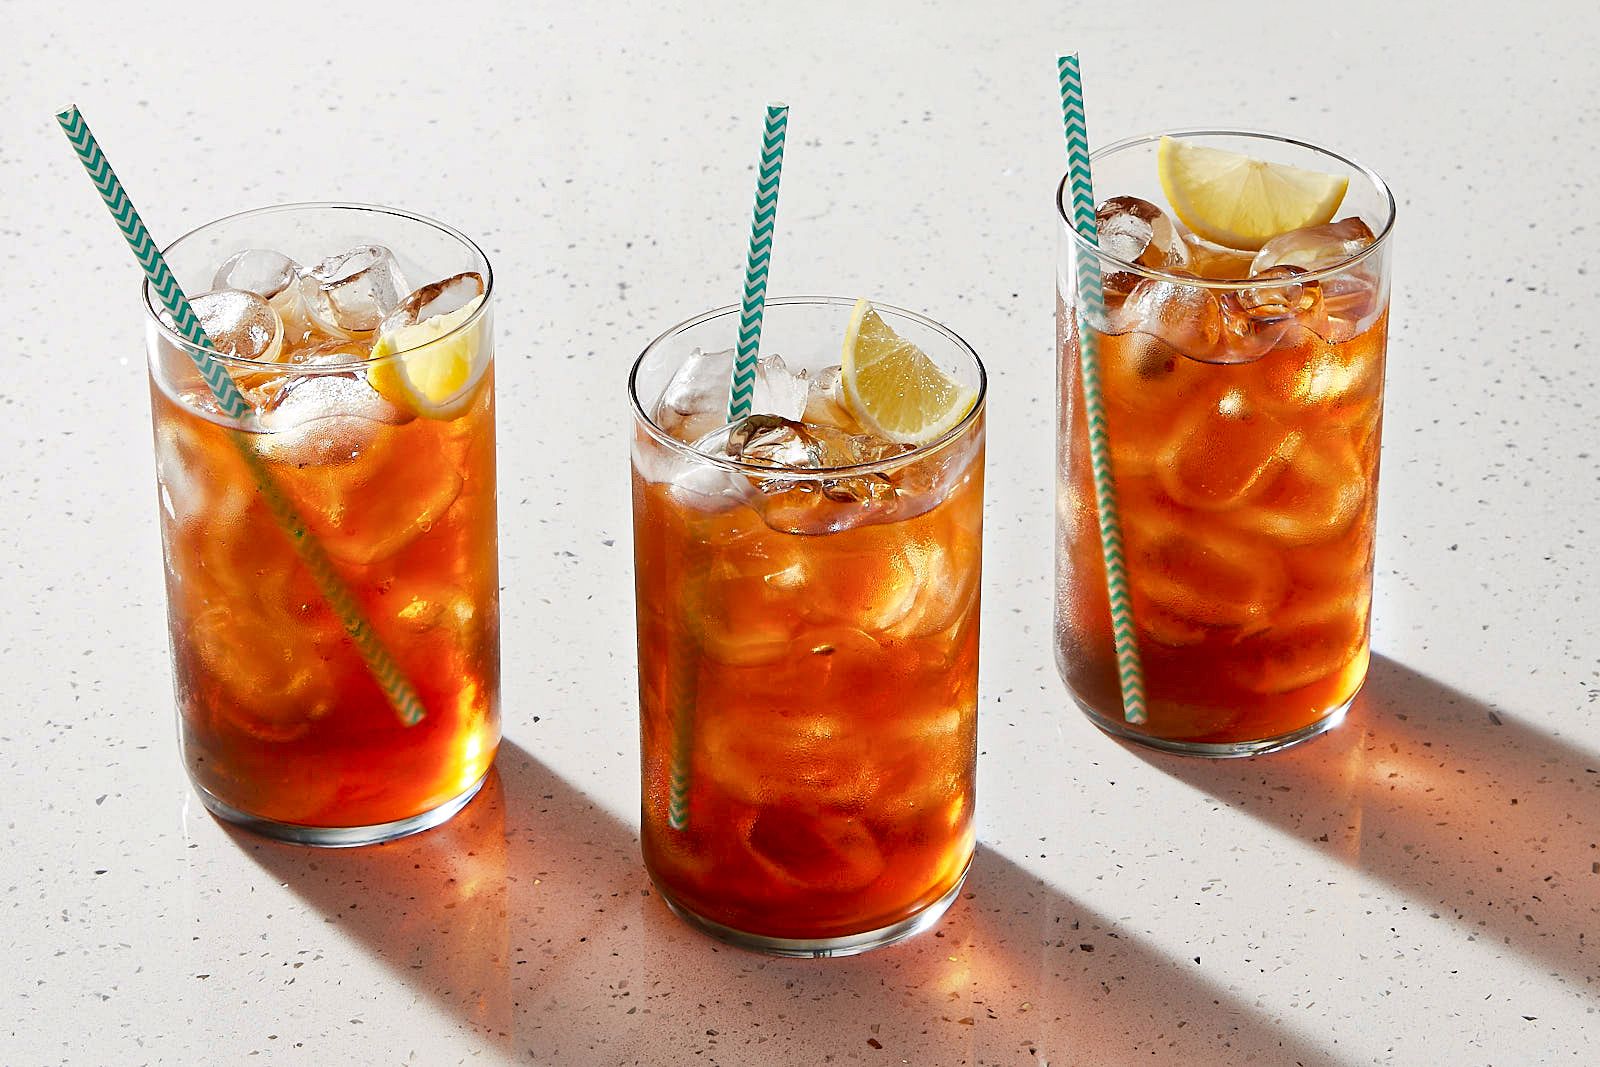 How to Make a Juicy, Fruity Iced Tea With Minimal Effort